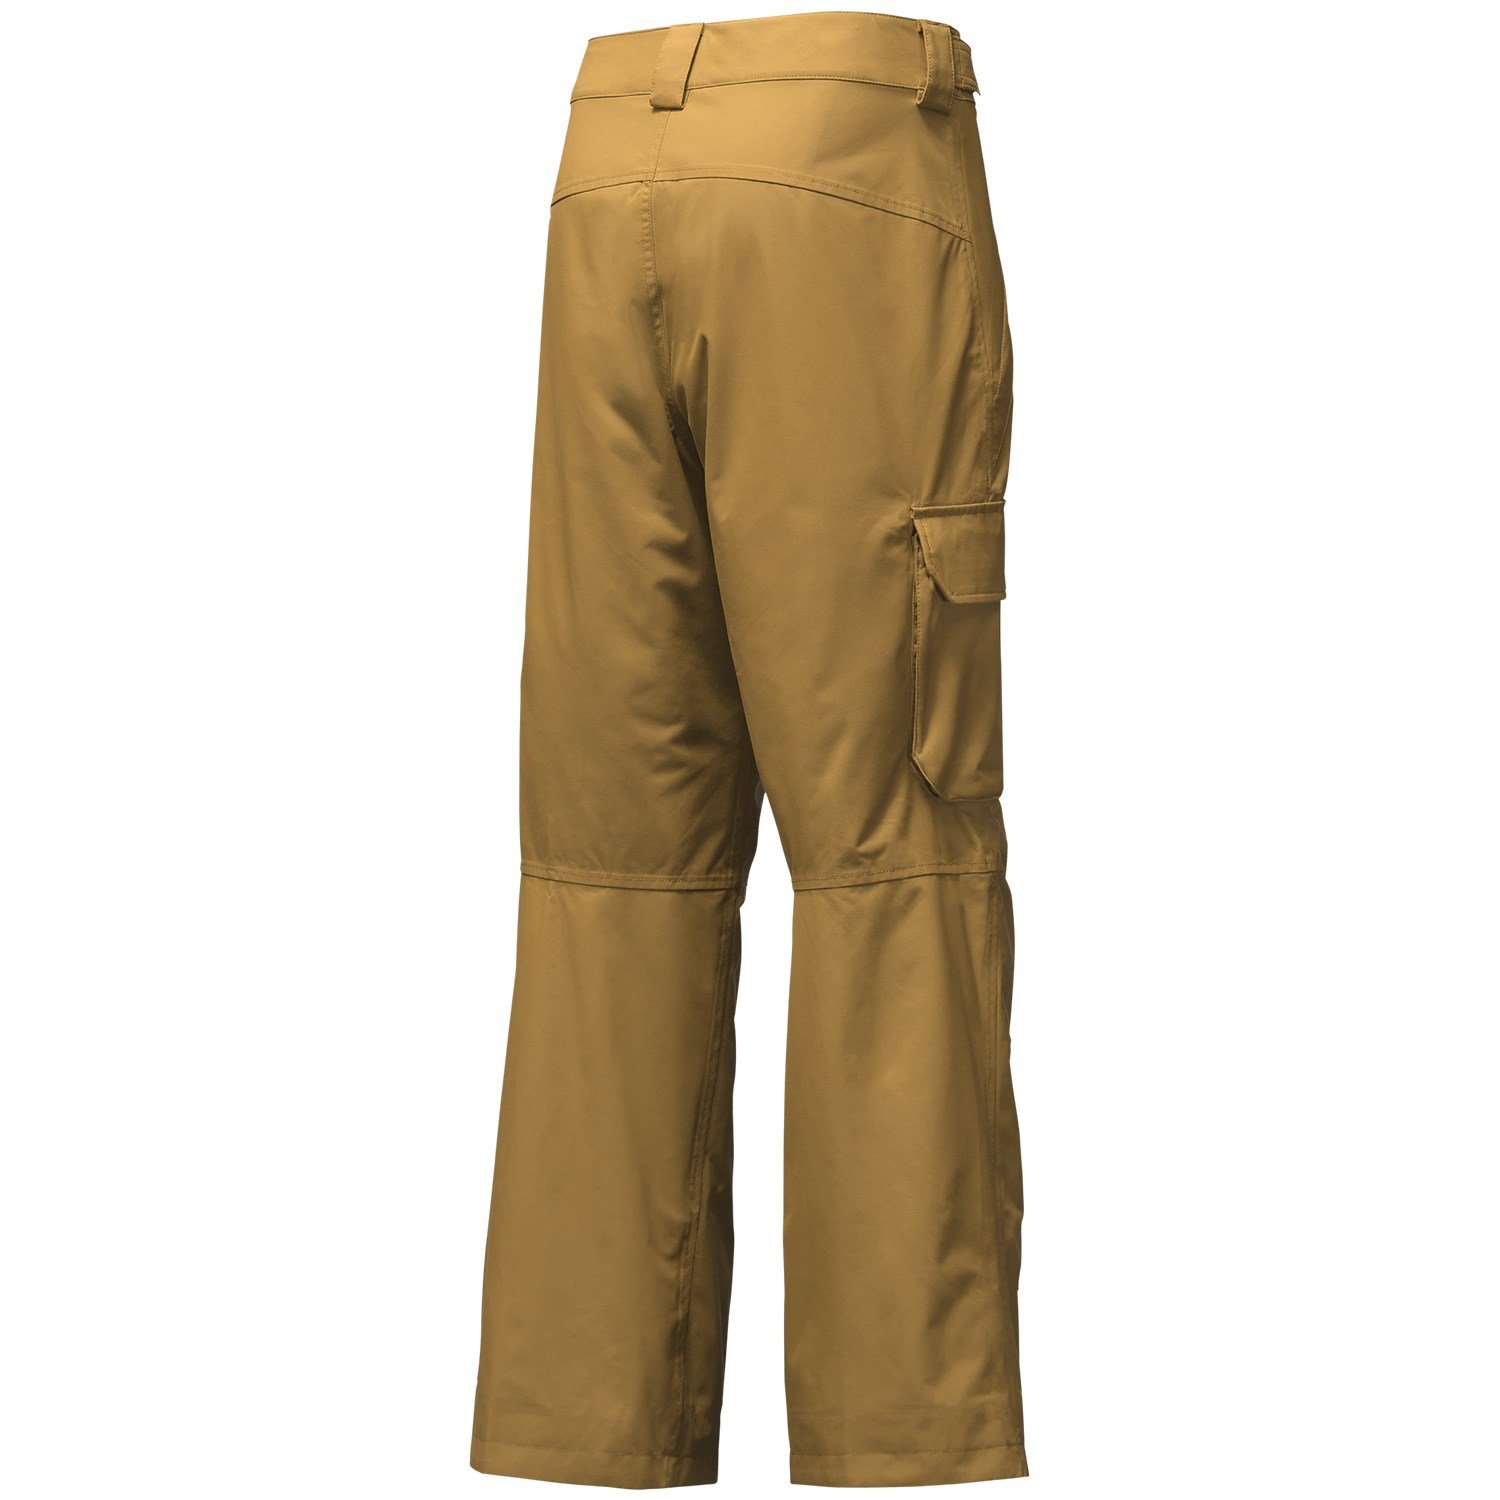 north face seymore pants review